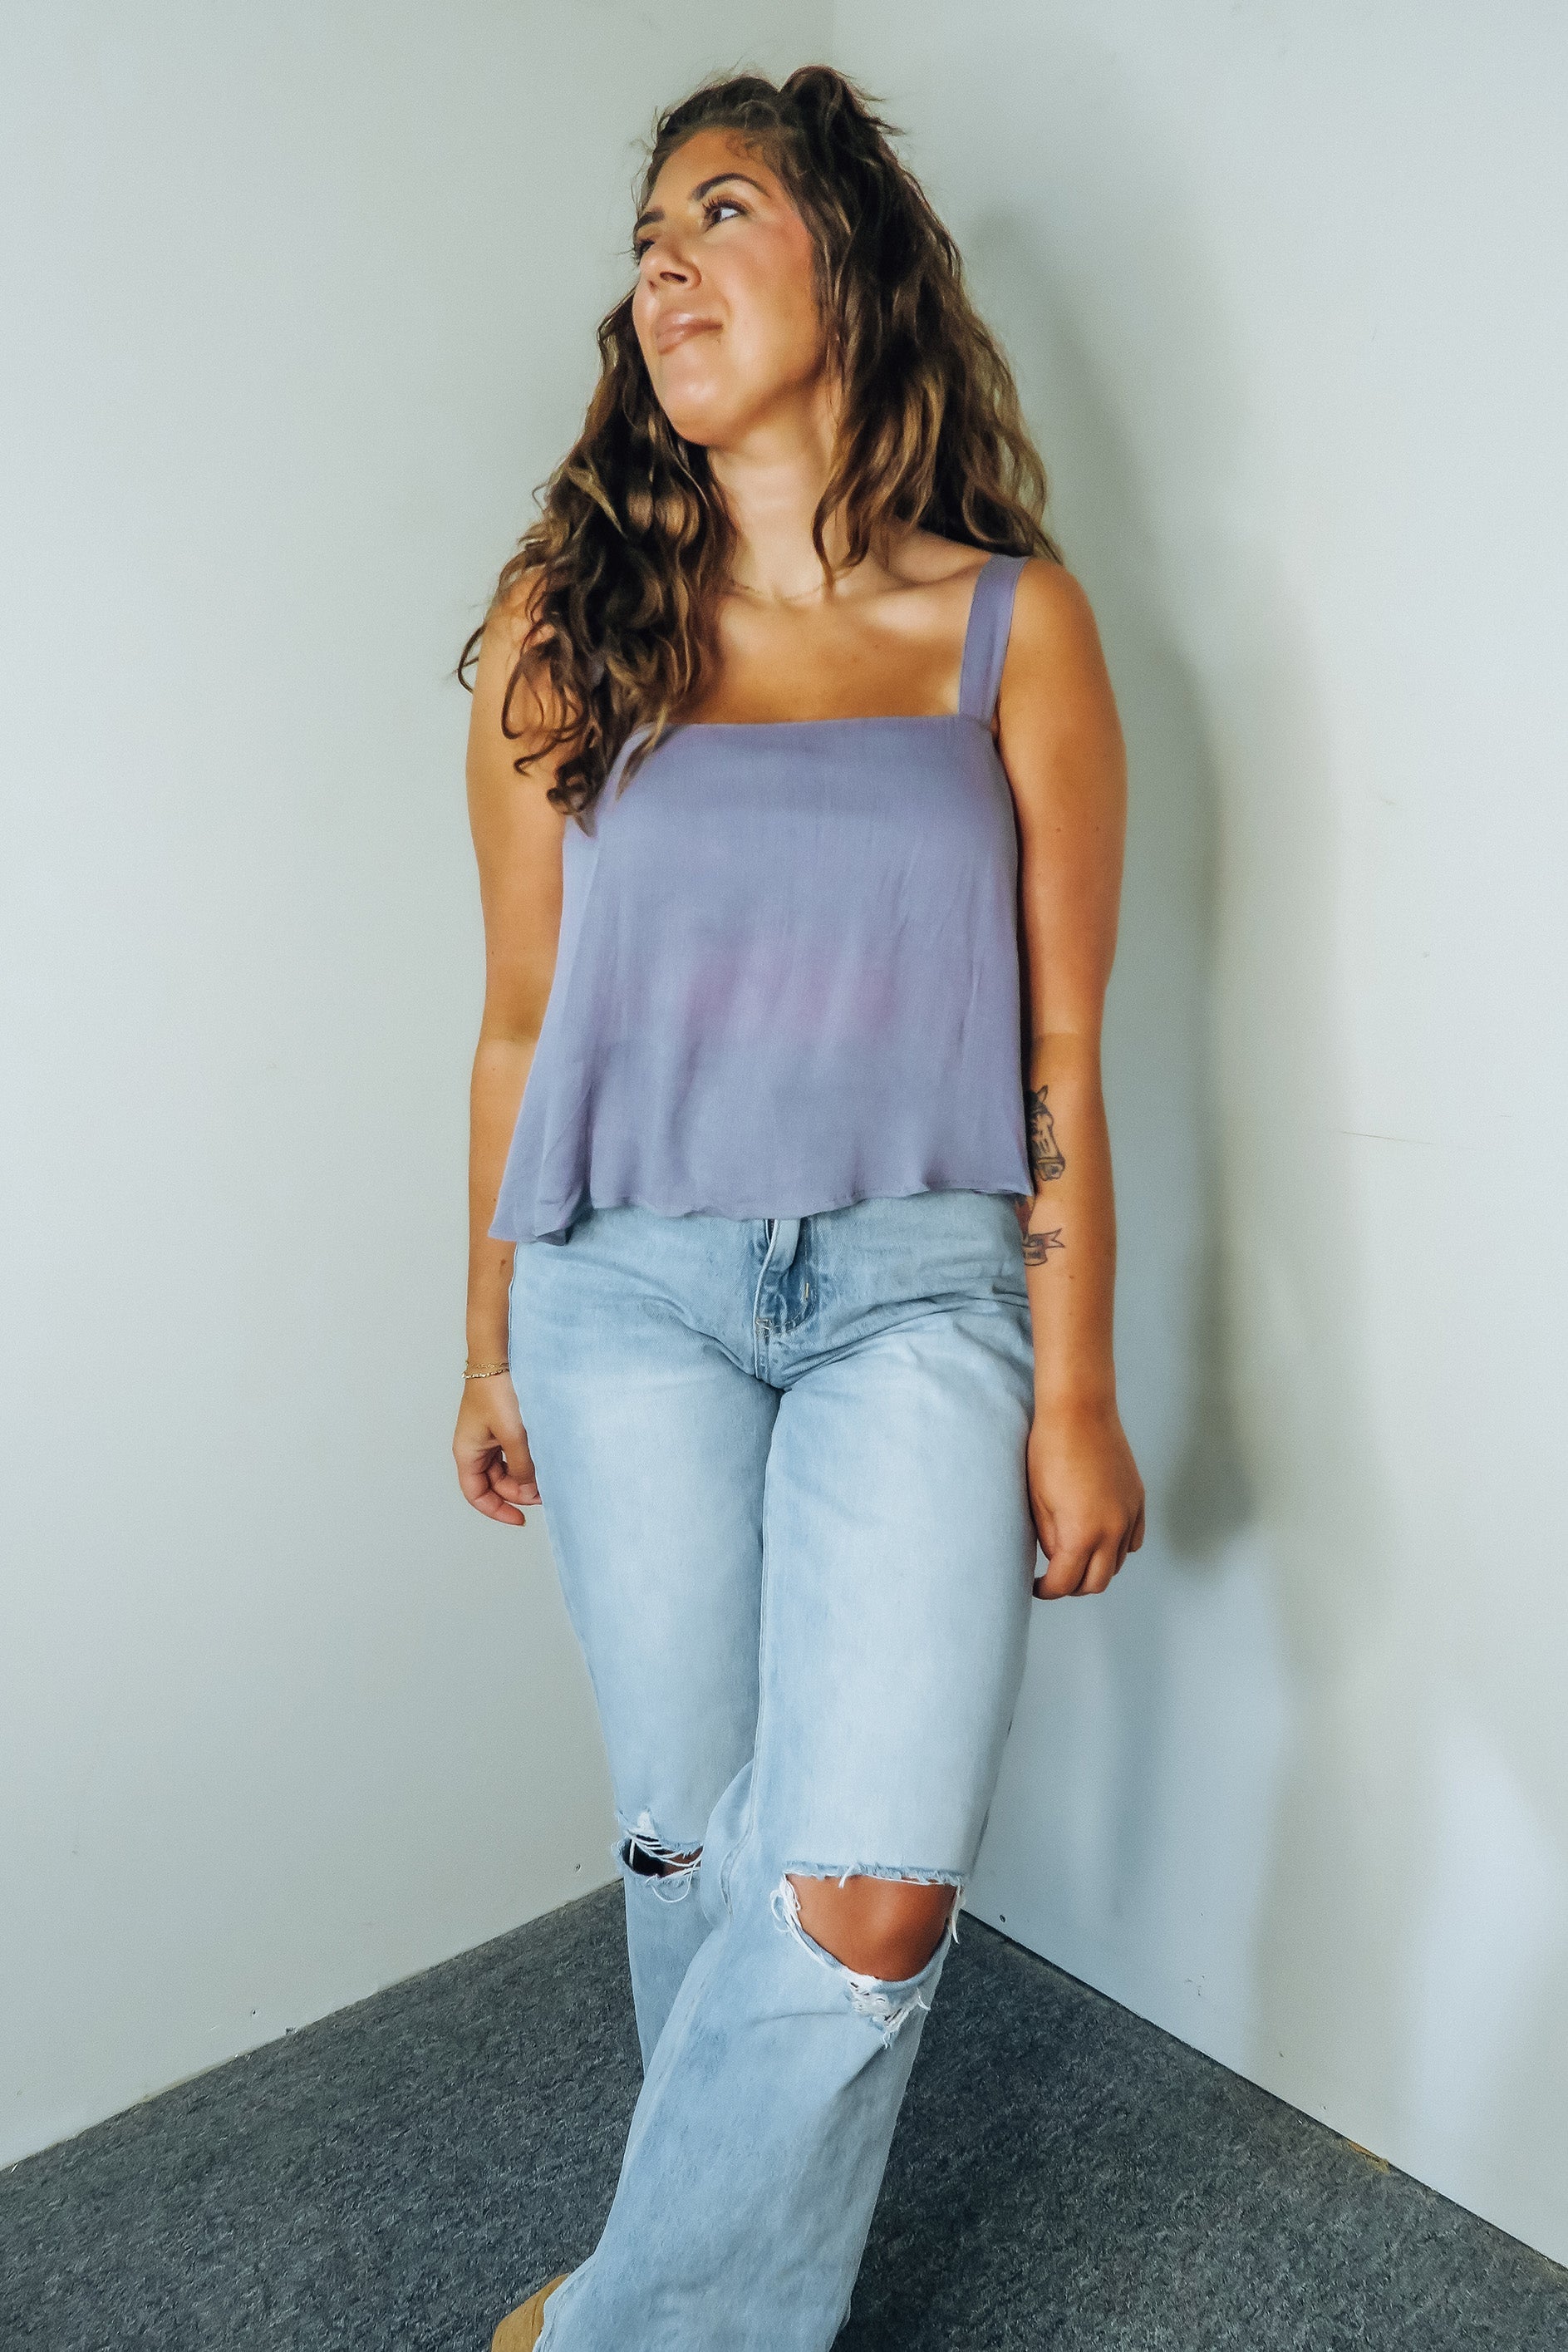 Flowy Square-Neck Tank Top With Built-In Bra - Shirts & Tops - The Green Brick Boutique